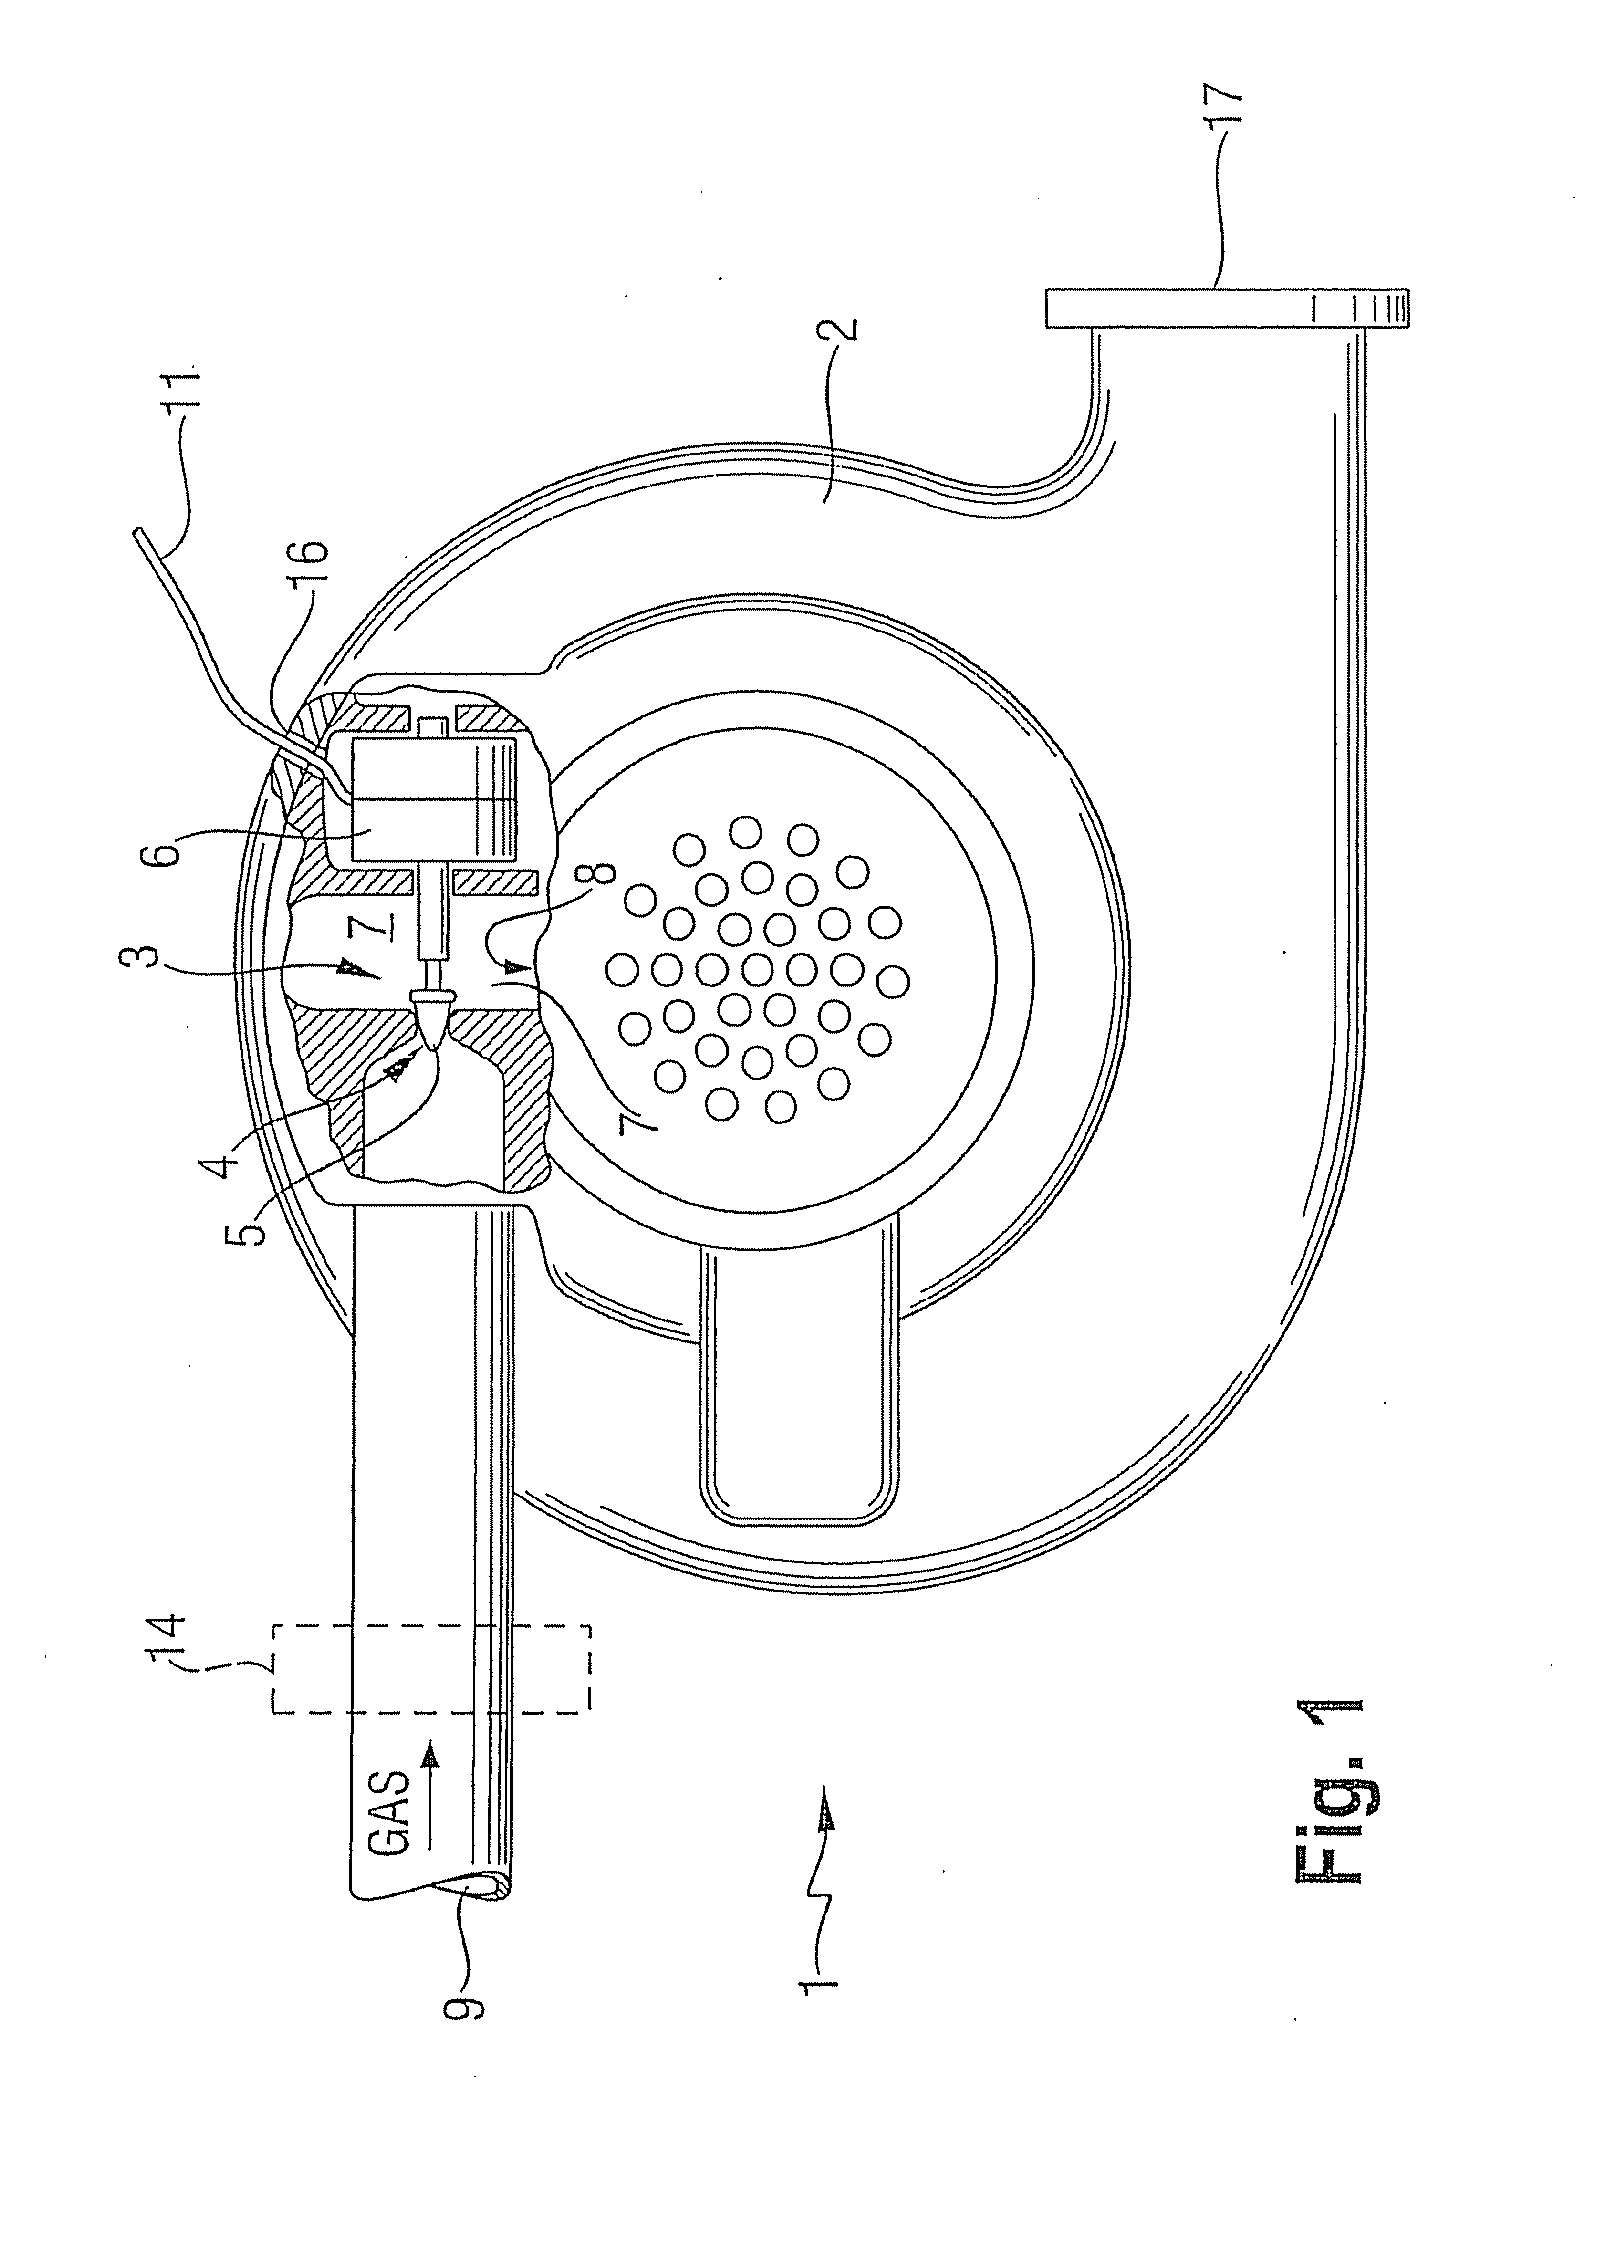 Fan with integrated regulation valve